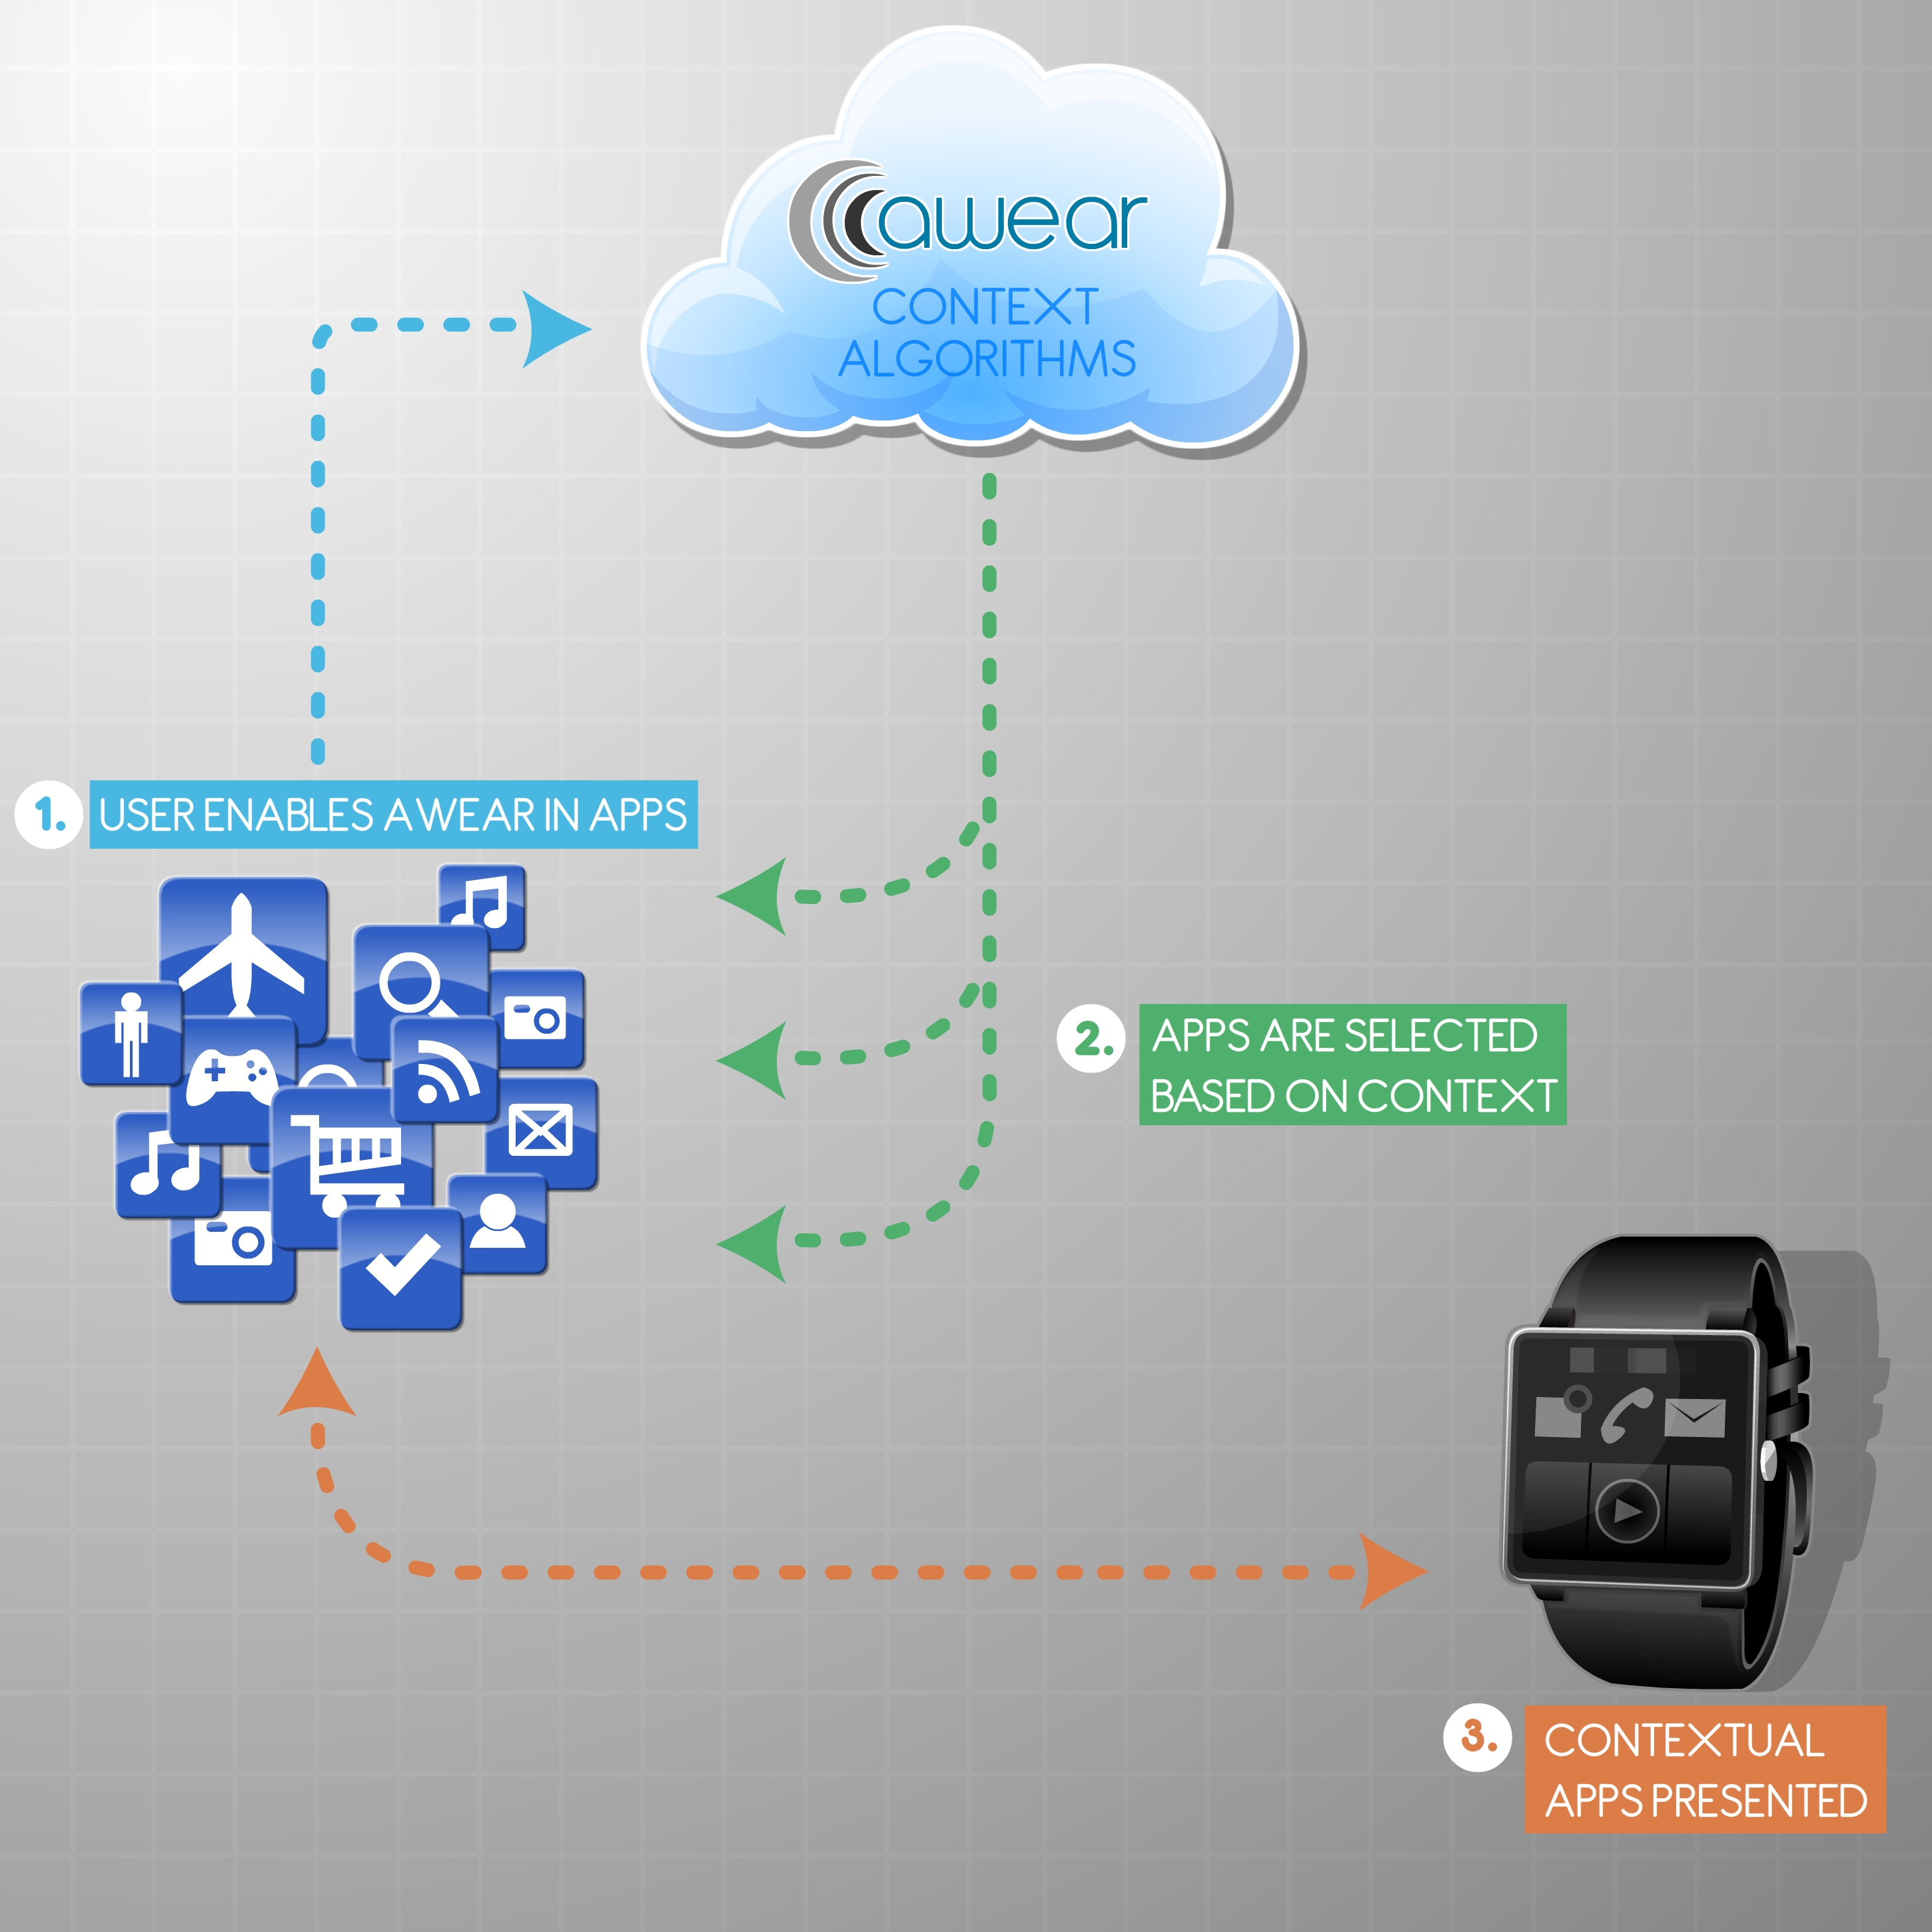 Awear, A Context Aware Software Platform for Wearable Applications